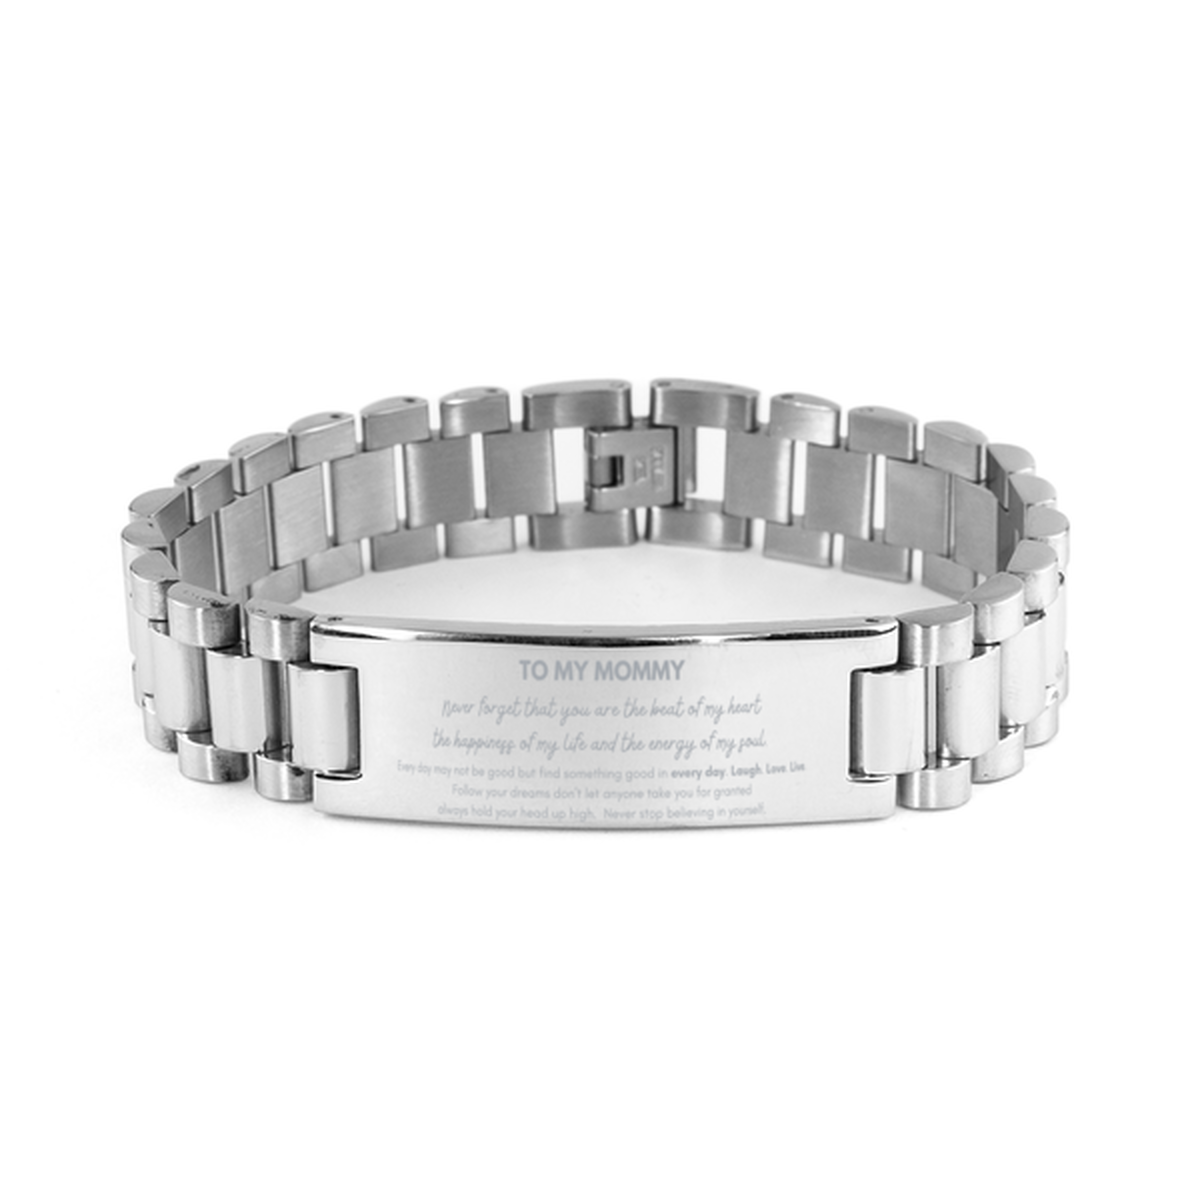 To My Mommy Bracelet Gifts, Christmas Mommy Ladder Stainless Steel Bracelet Present, Birthday Unique Motivational For Mommy, To My Mommy Never forget that you are the beat of my heart the happiness of my life and the energy of my soul